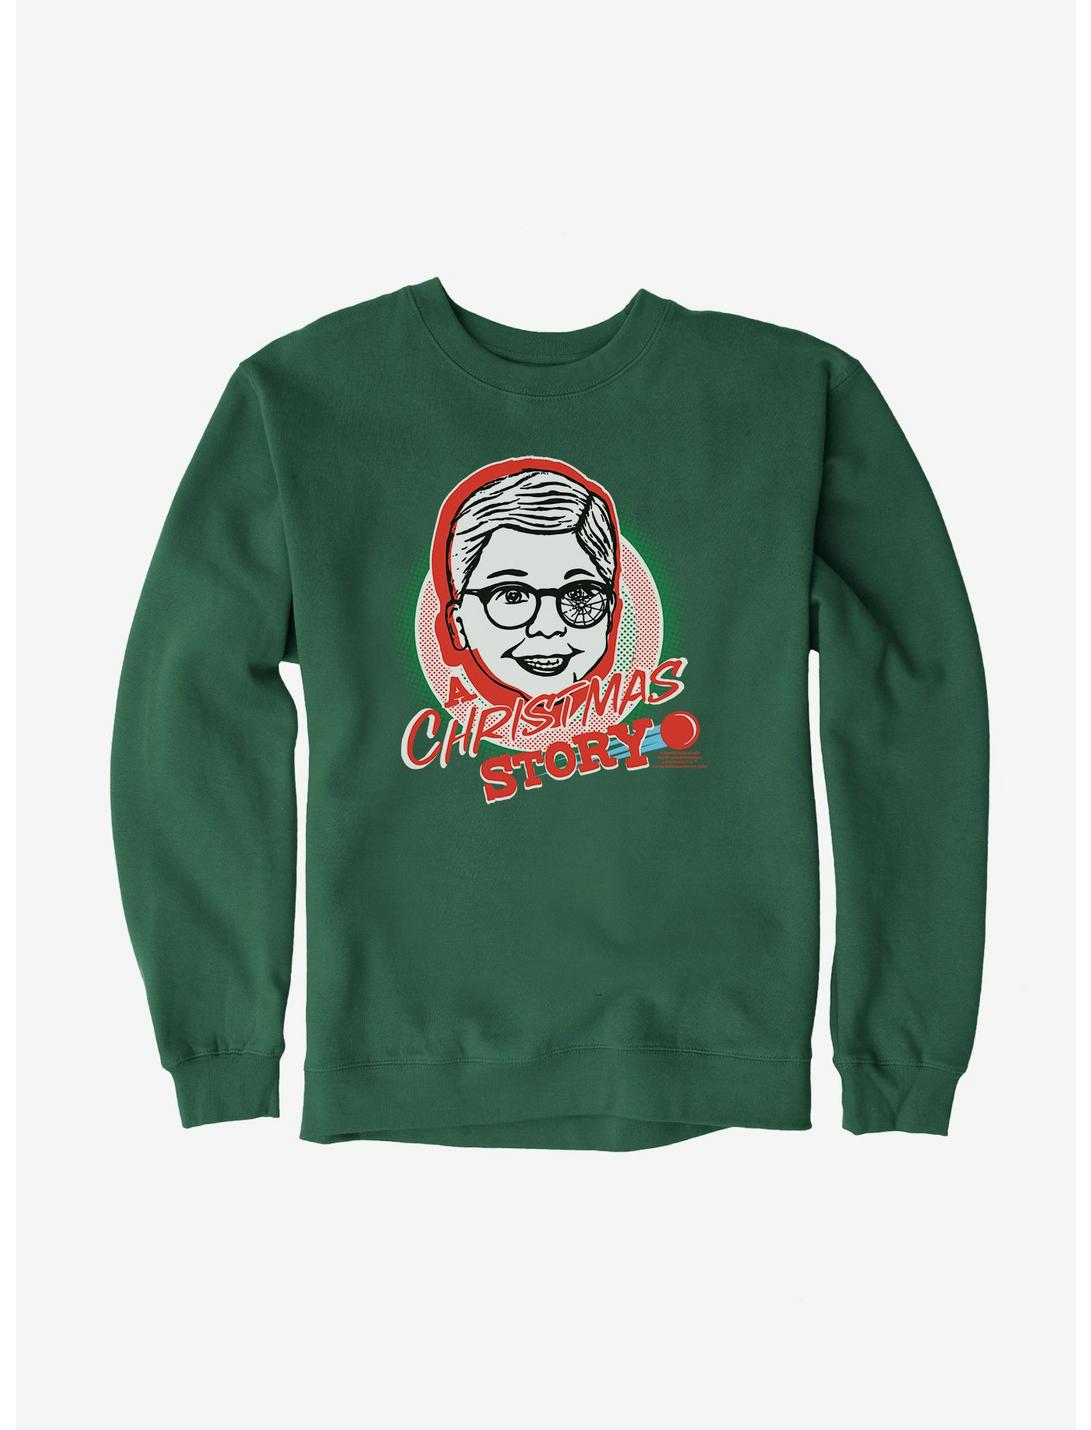 A Christmas Story  Shoot Your Eye  Sweatshirt, FOREST, hi-res